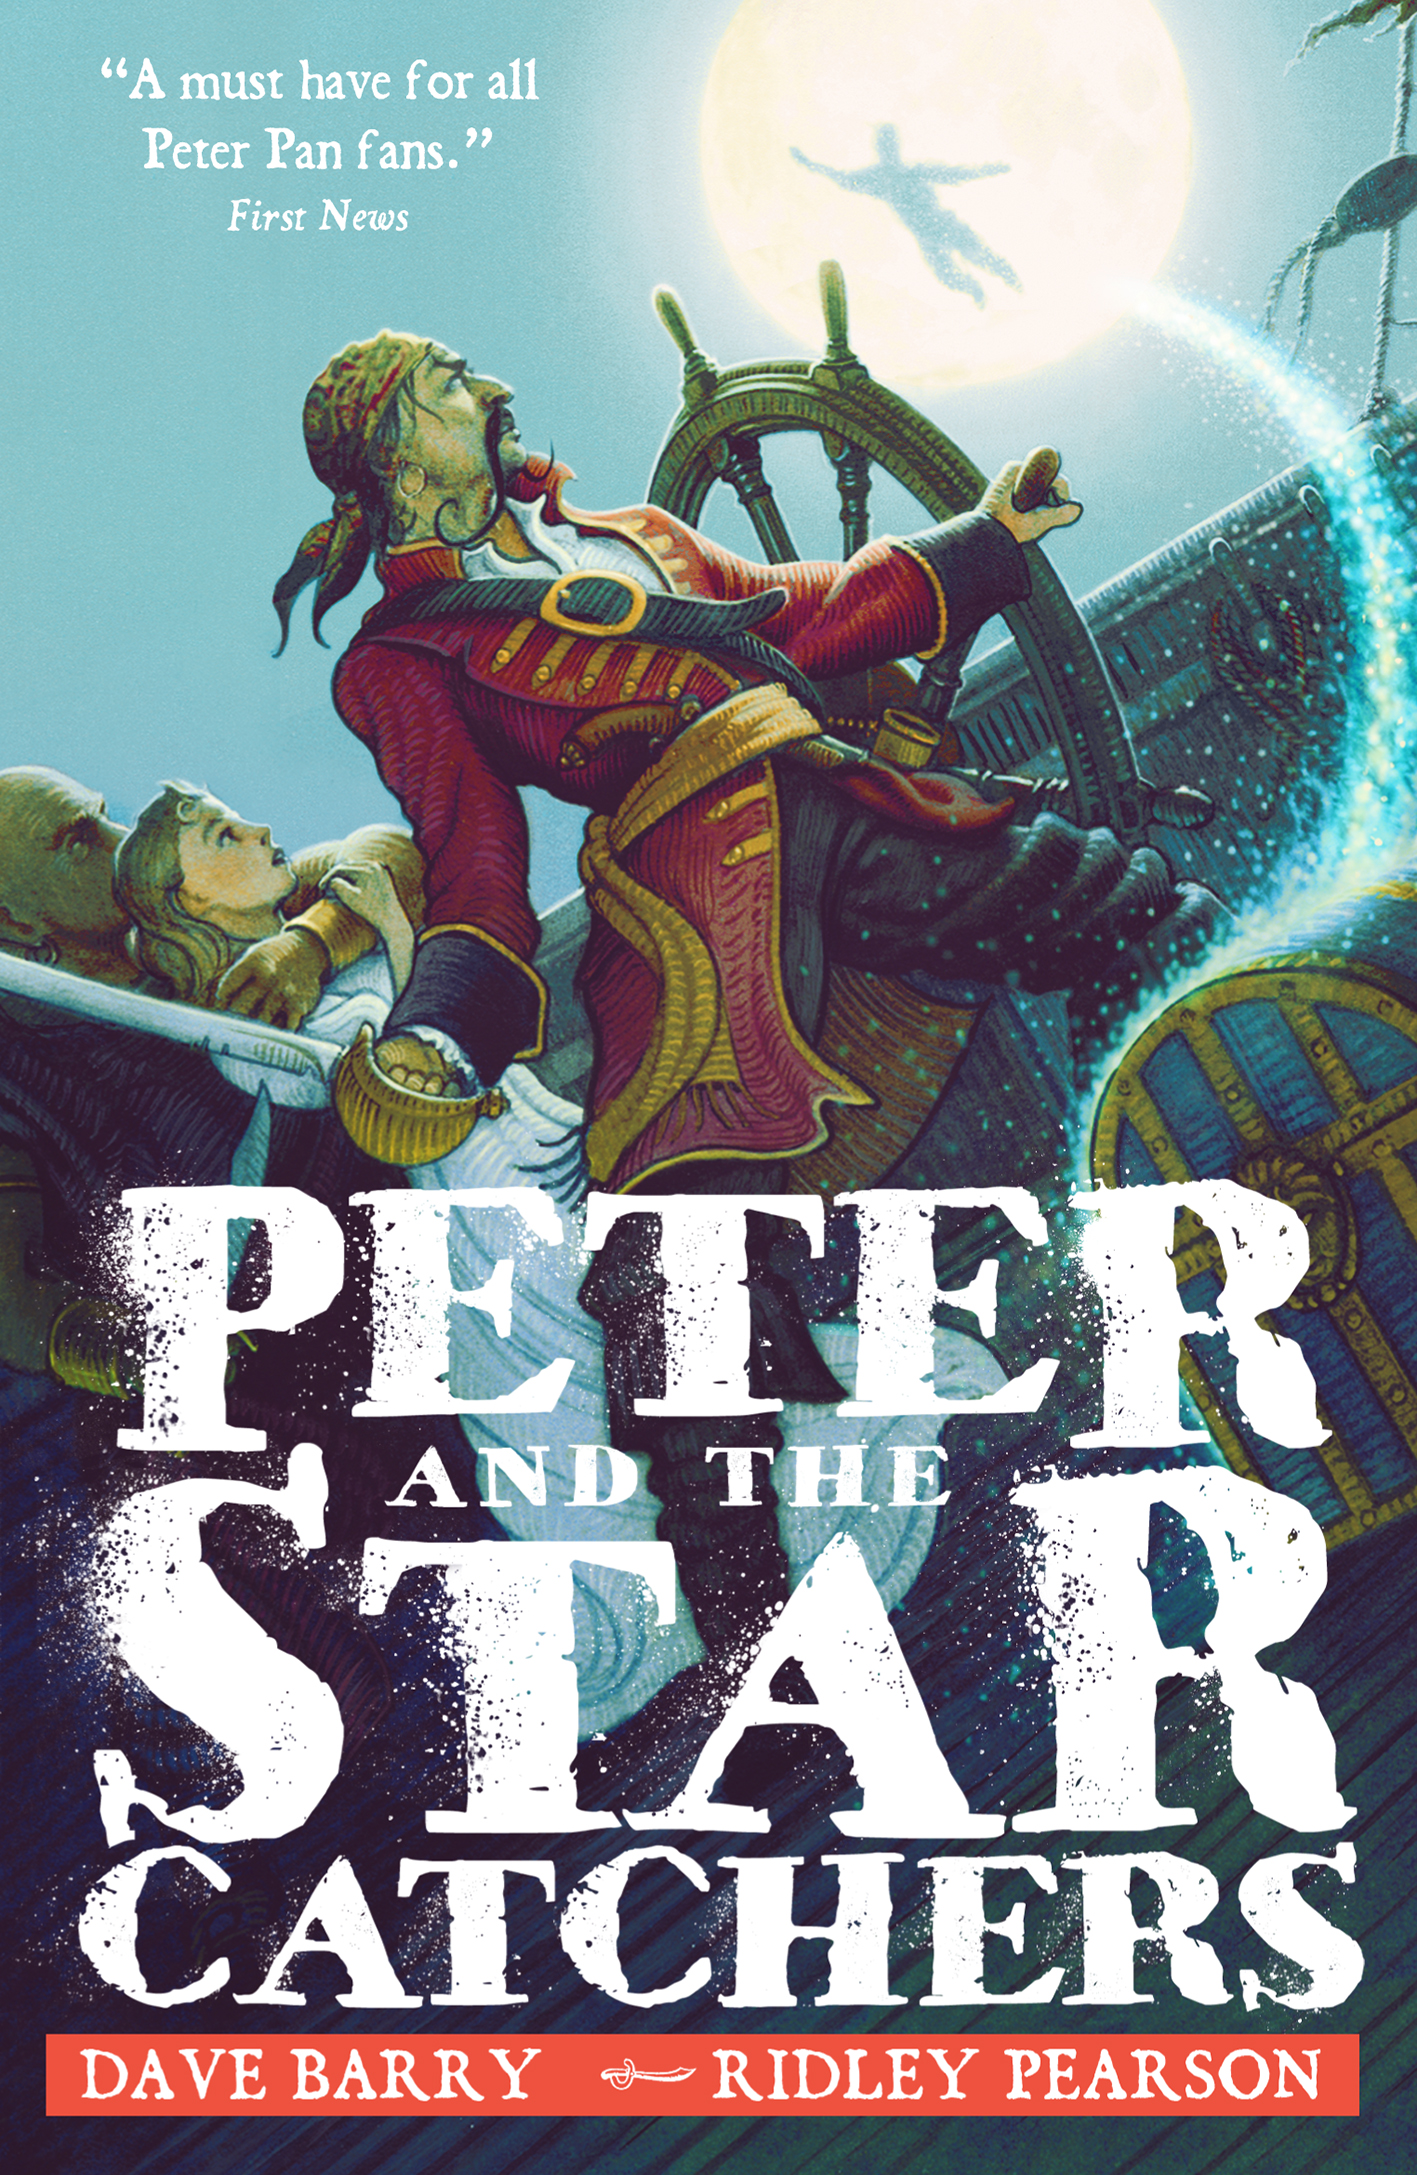 Peter-and-the-Starcatchers